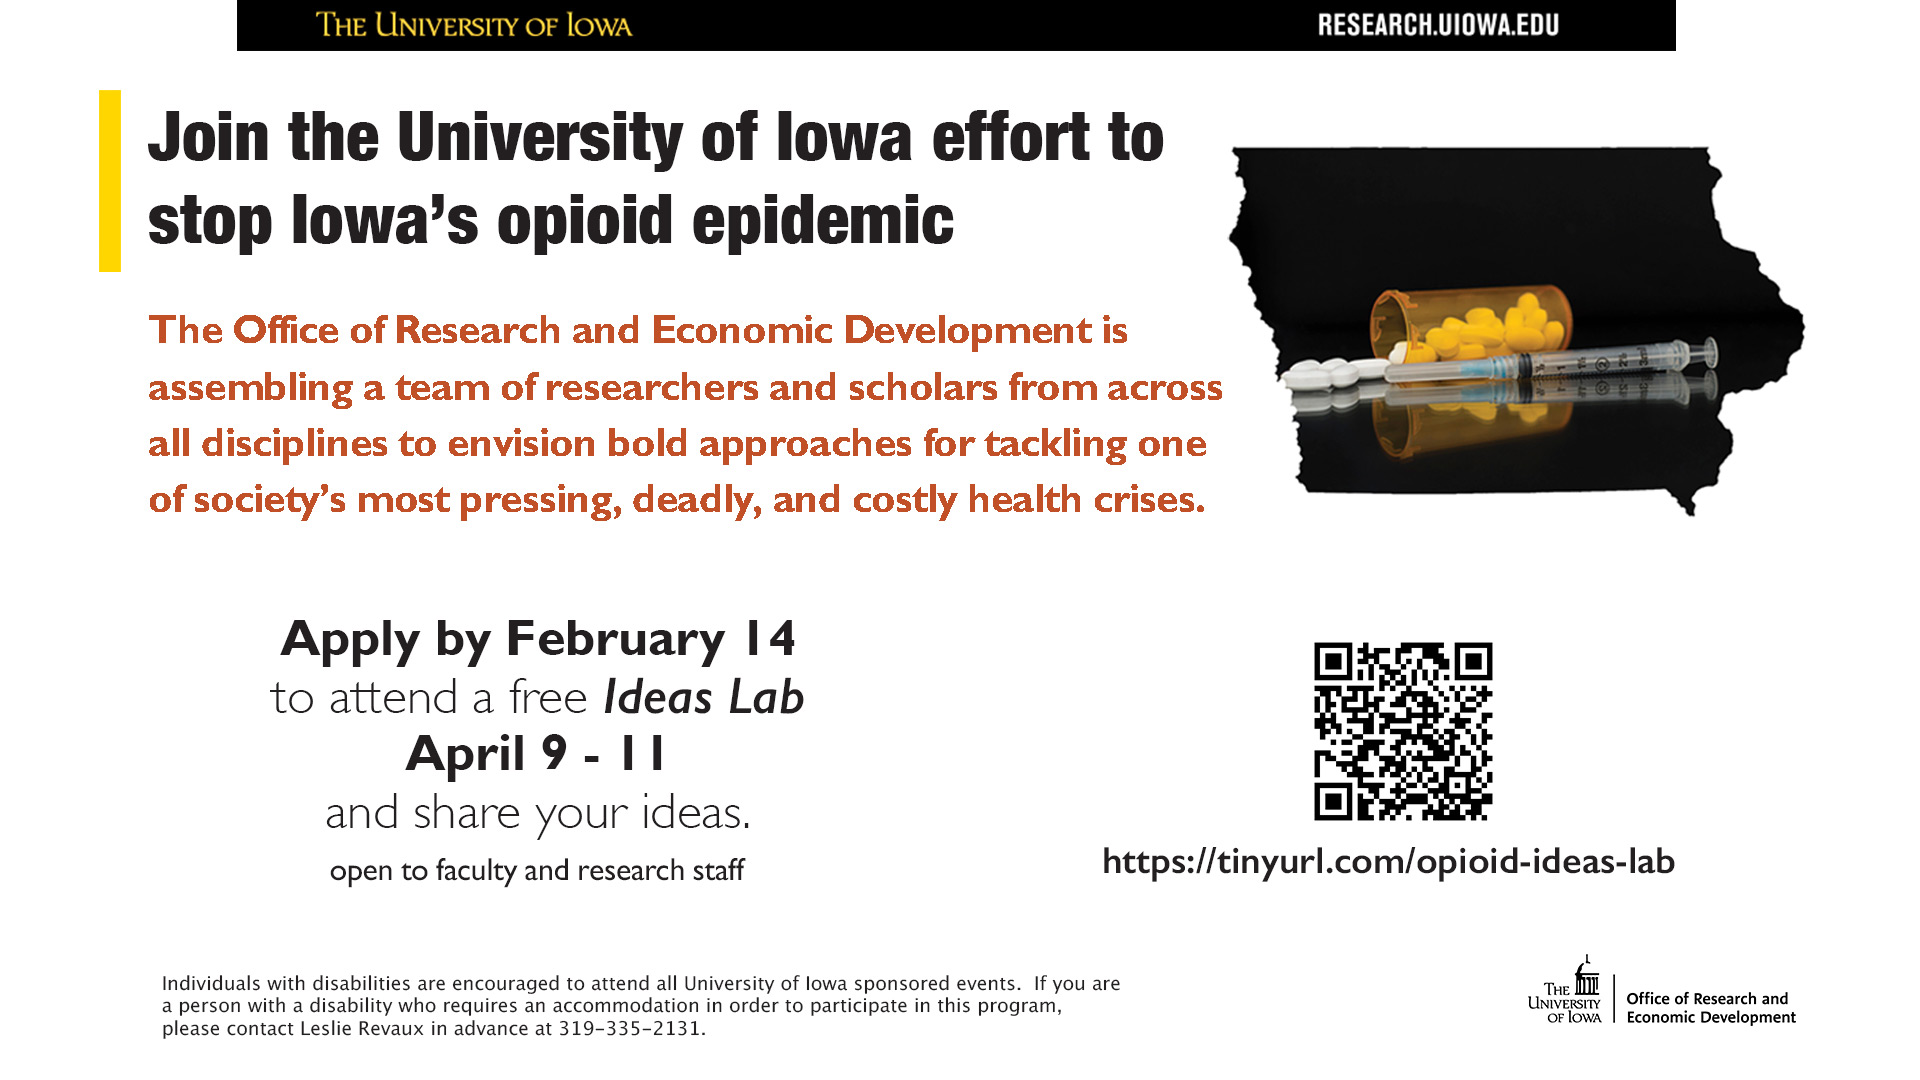 Join the University of Iowa effort to stop Iowa's opioid epidemic.  The office of Research and Economic Development is assembling a team of researchers and scholars from across all disciplines to envision bold approaches for tackling one of society's most pressing, deadly, and costly health crises. Apply by February 14 to attend a free Ideas Lab April 9-11 and share your ideas. Open to faculty and research staff. Individuals with disabilities are encouraged to attend all UI sponsored events. If you are a person with a disability who requires an accommodation to participate in this program, please contact Leslie Revaux in advance at 319-335-2131